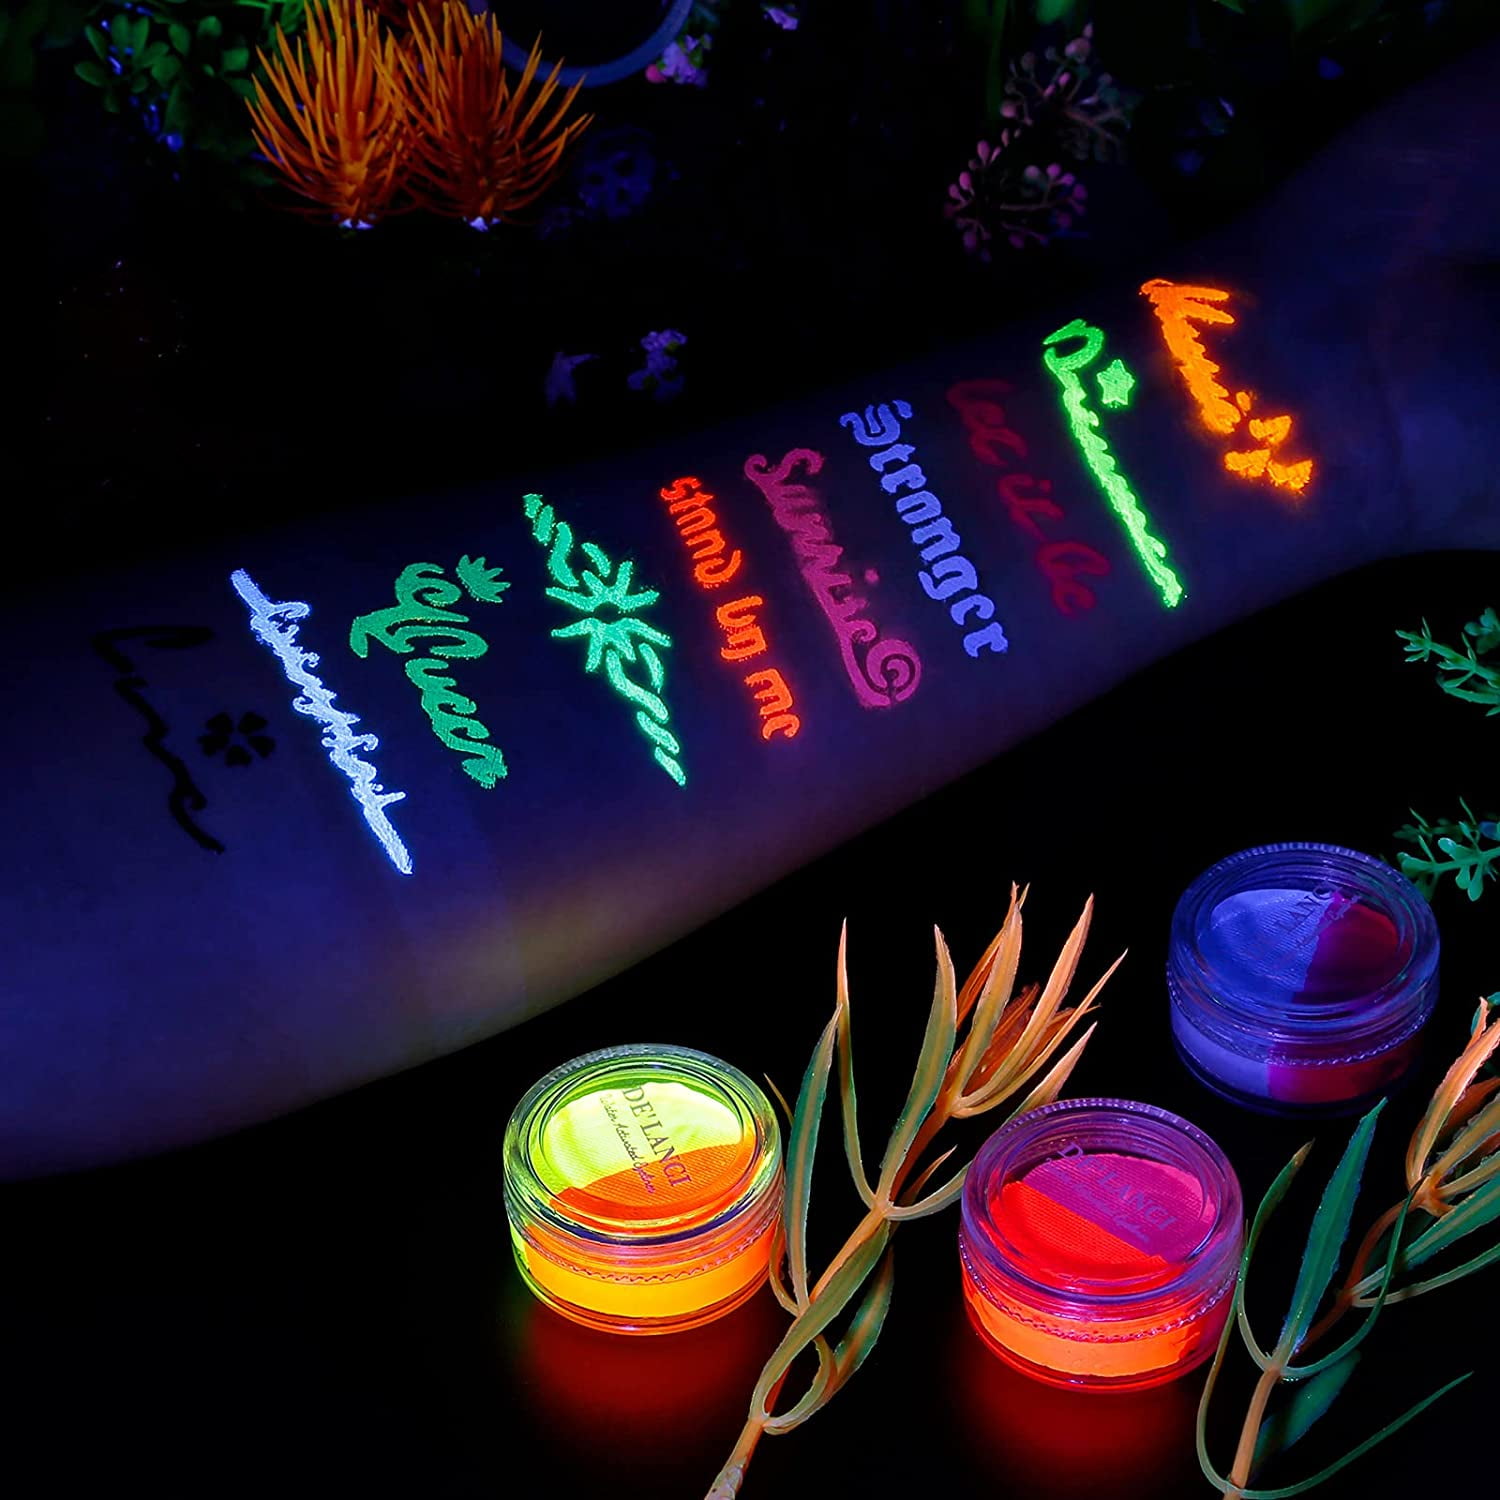 Water Activated Split Cake Eyeliner UV Glow Blacklight Fluorescent Paint  Onmay 14 Bright Color Retro Graphic Hydra Eye Liner Body Face Paint  Halloween Makeup (14color)